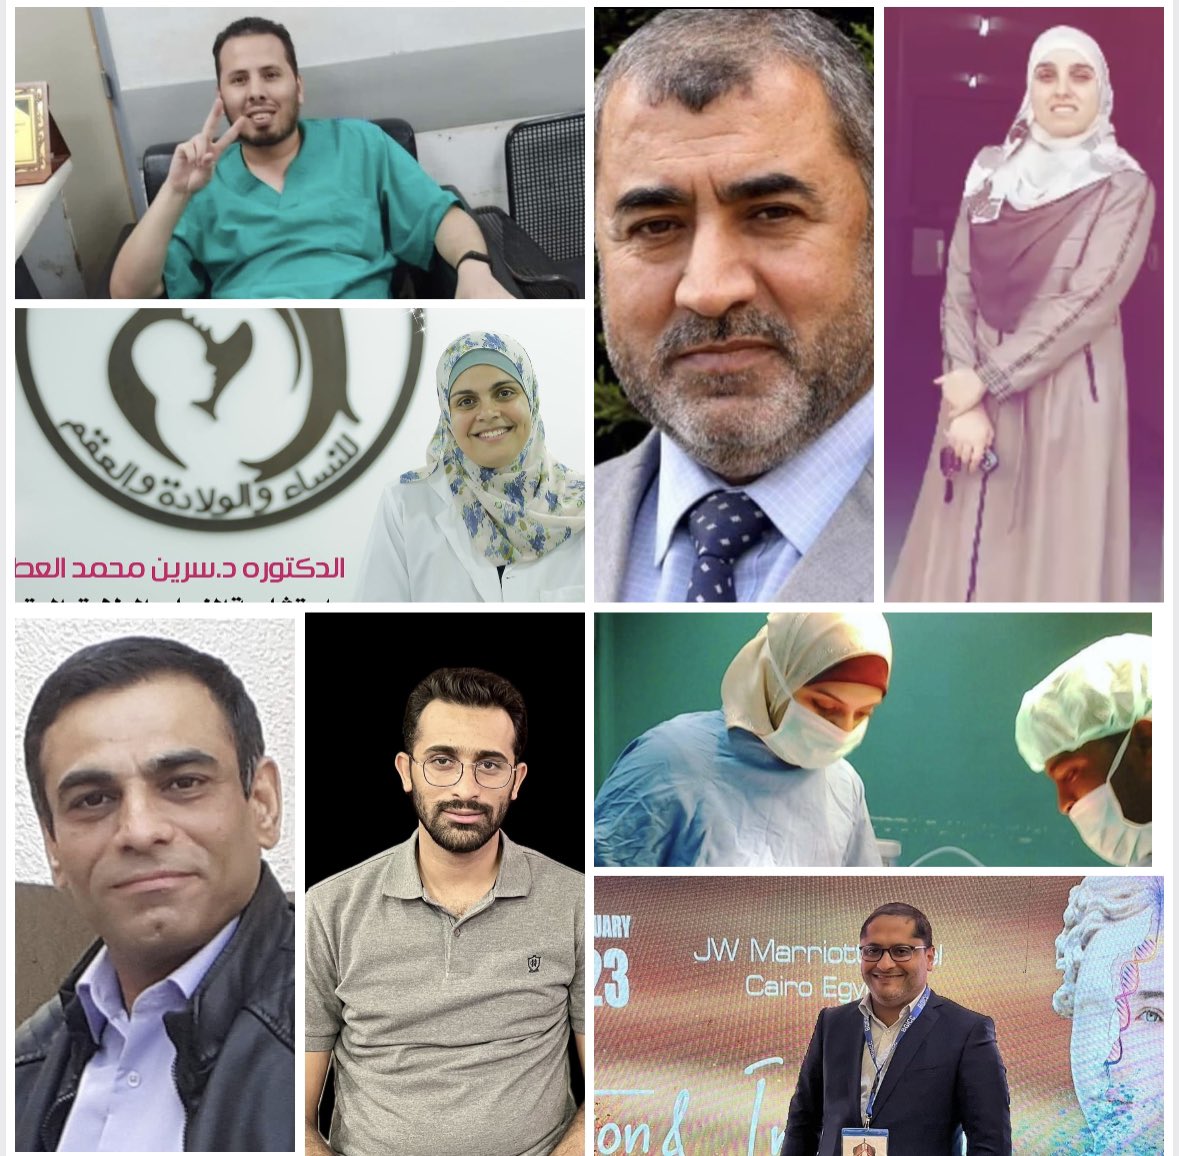 So far 8 doctors were killed in Gaza by the #IOF. Those were either dean of med school, consultants or trainees. I worked with all of them and I know how dedicated they were to their profession. The loss is huge and I hope med associations stand with their colleagues #MedTwitter